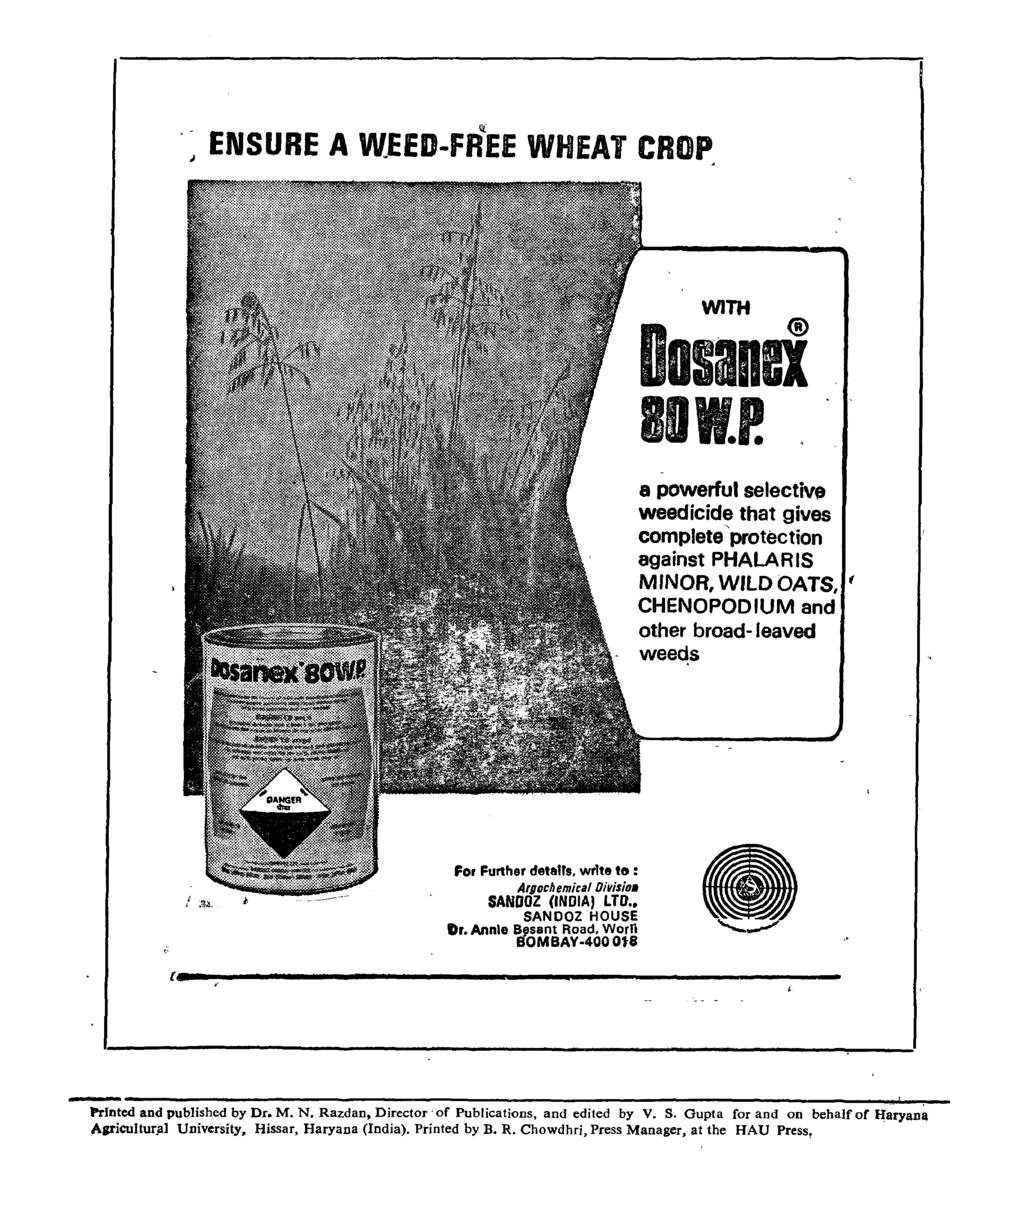 J ENSURE A WEED-fREE WHEAT CROP Ii: WITH DosanBi BOw.P. a powerful selectiv, weedicide that gives complete 'protection against PHALARIS MINOR, WILD OATS, ( CHENOPODIUM and other broad- leaved weeds For Further deta"!